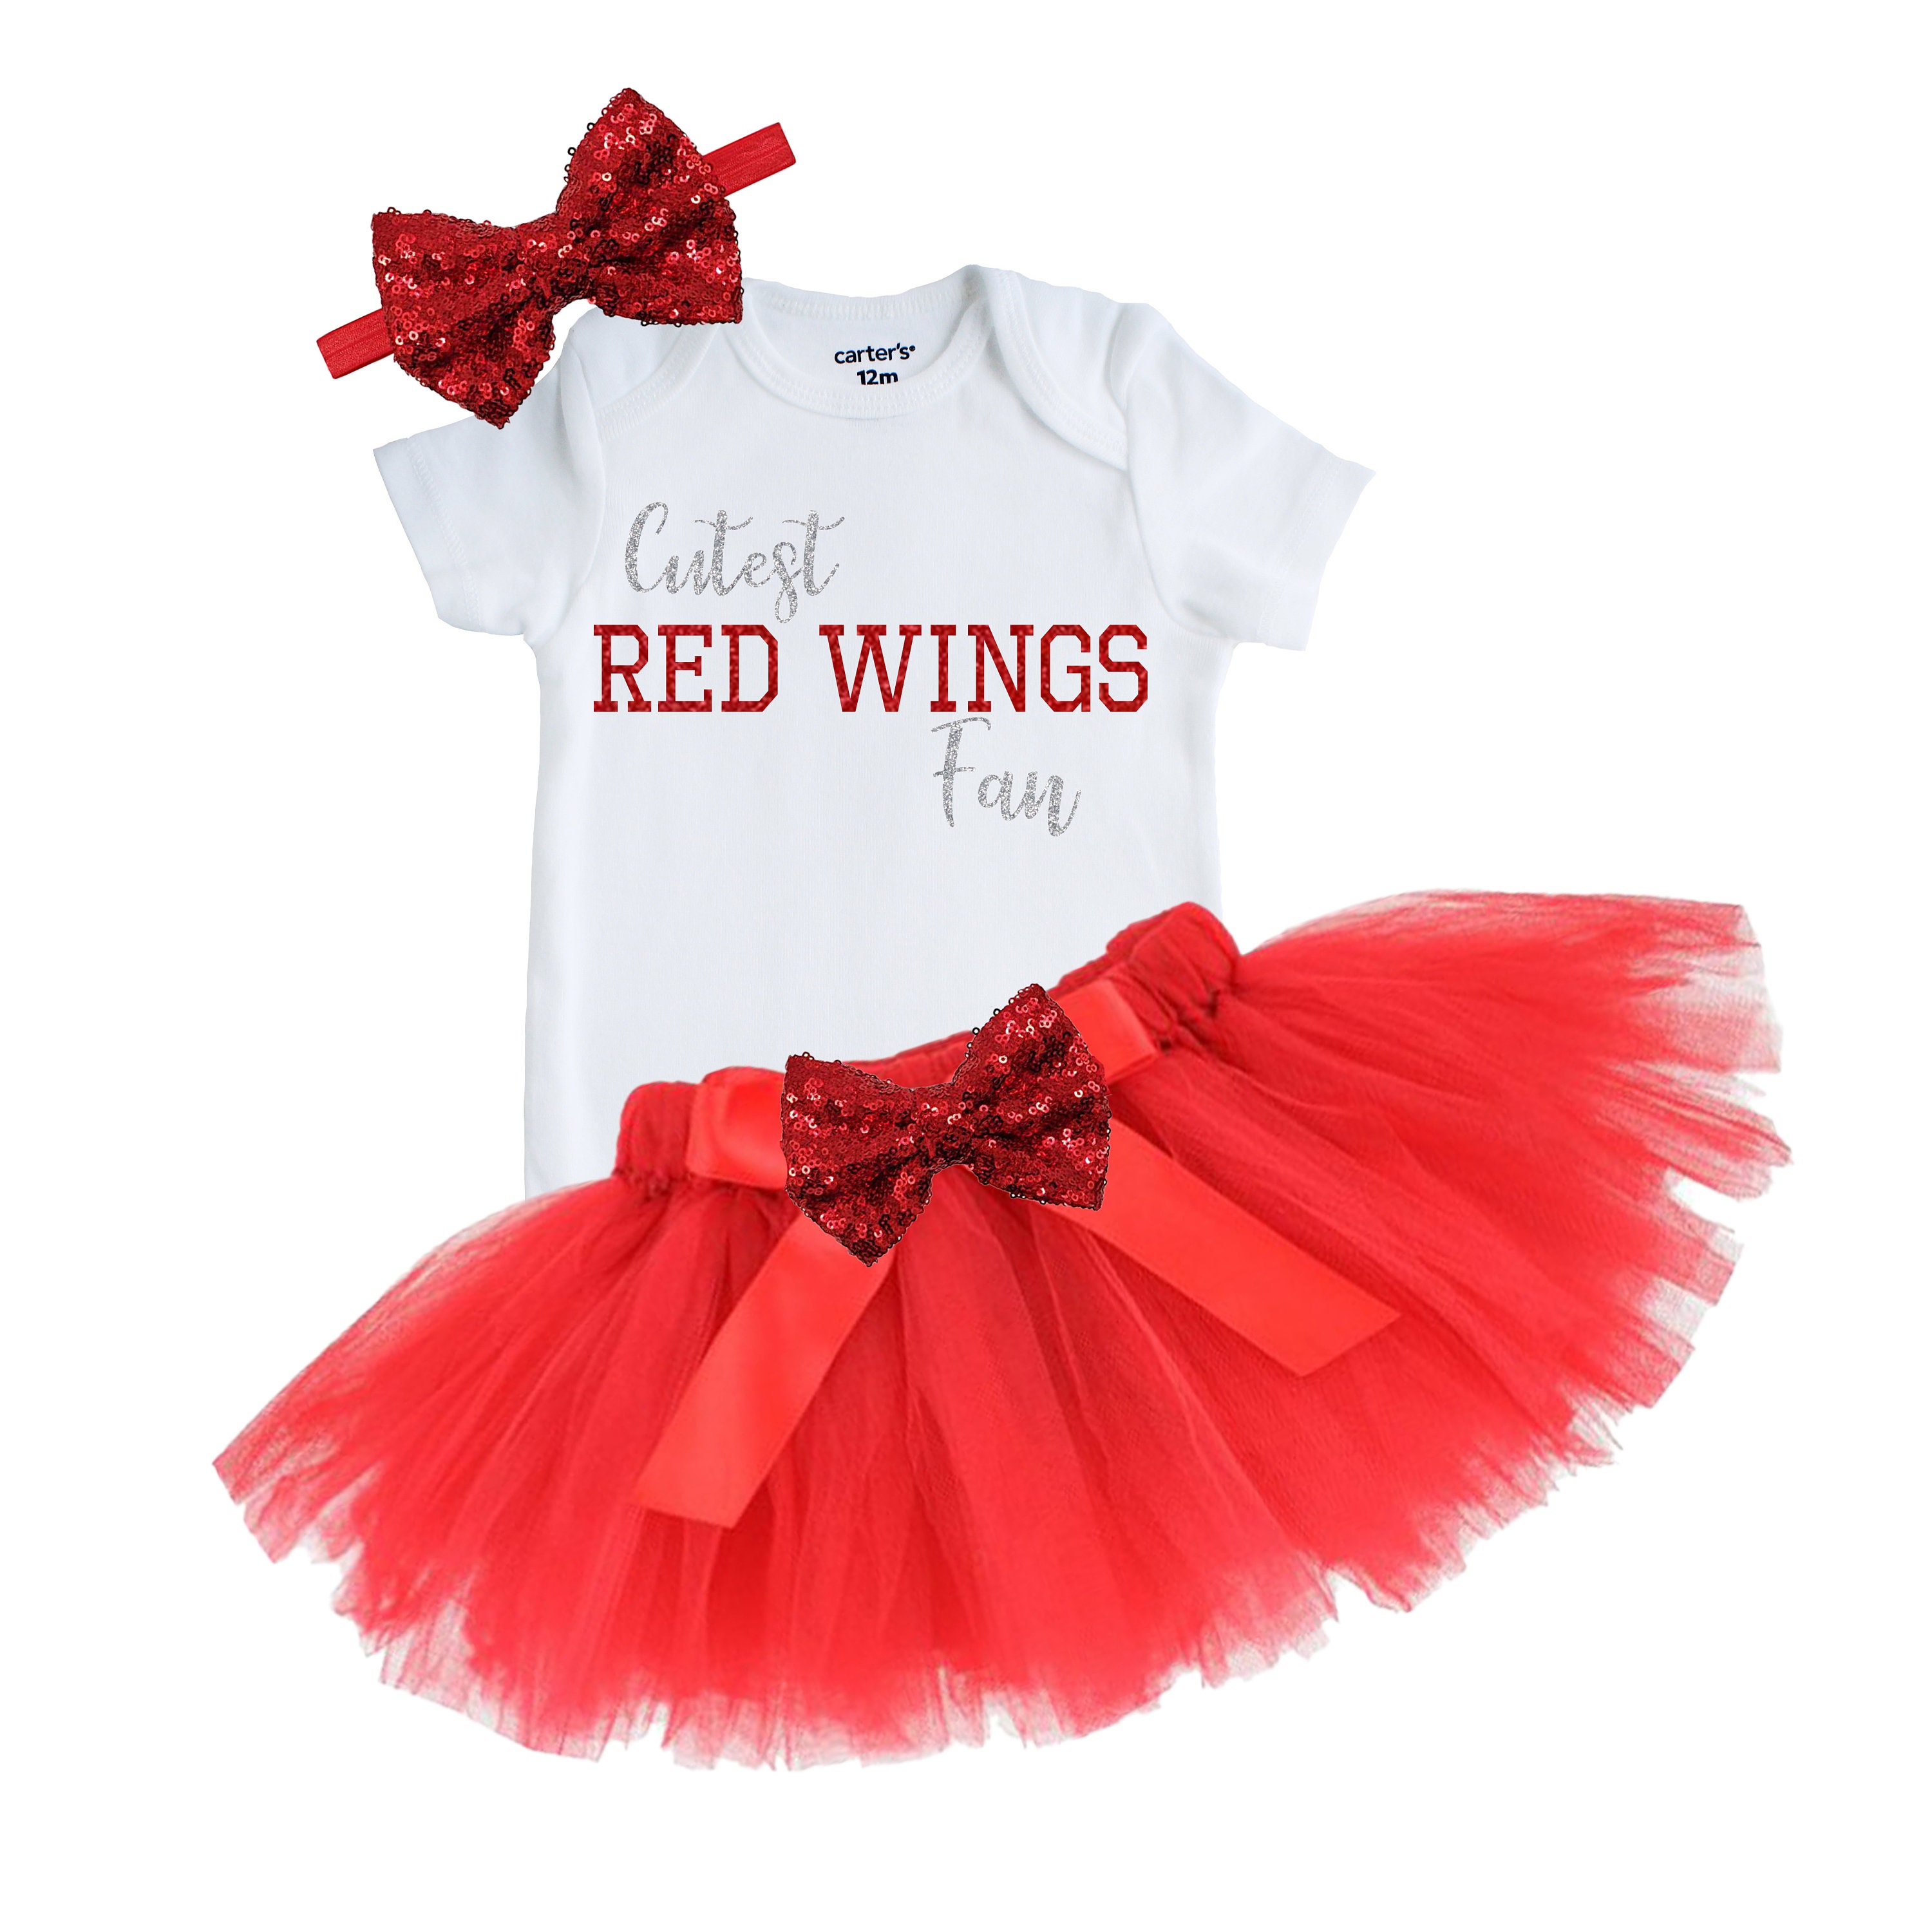 Upcycled Red Wings Baby Tee *MADE TO ORDER* - Tonguetied Apparel